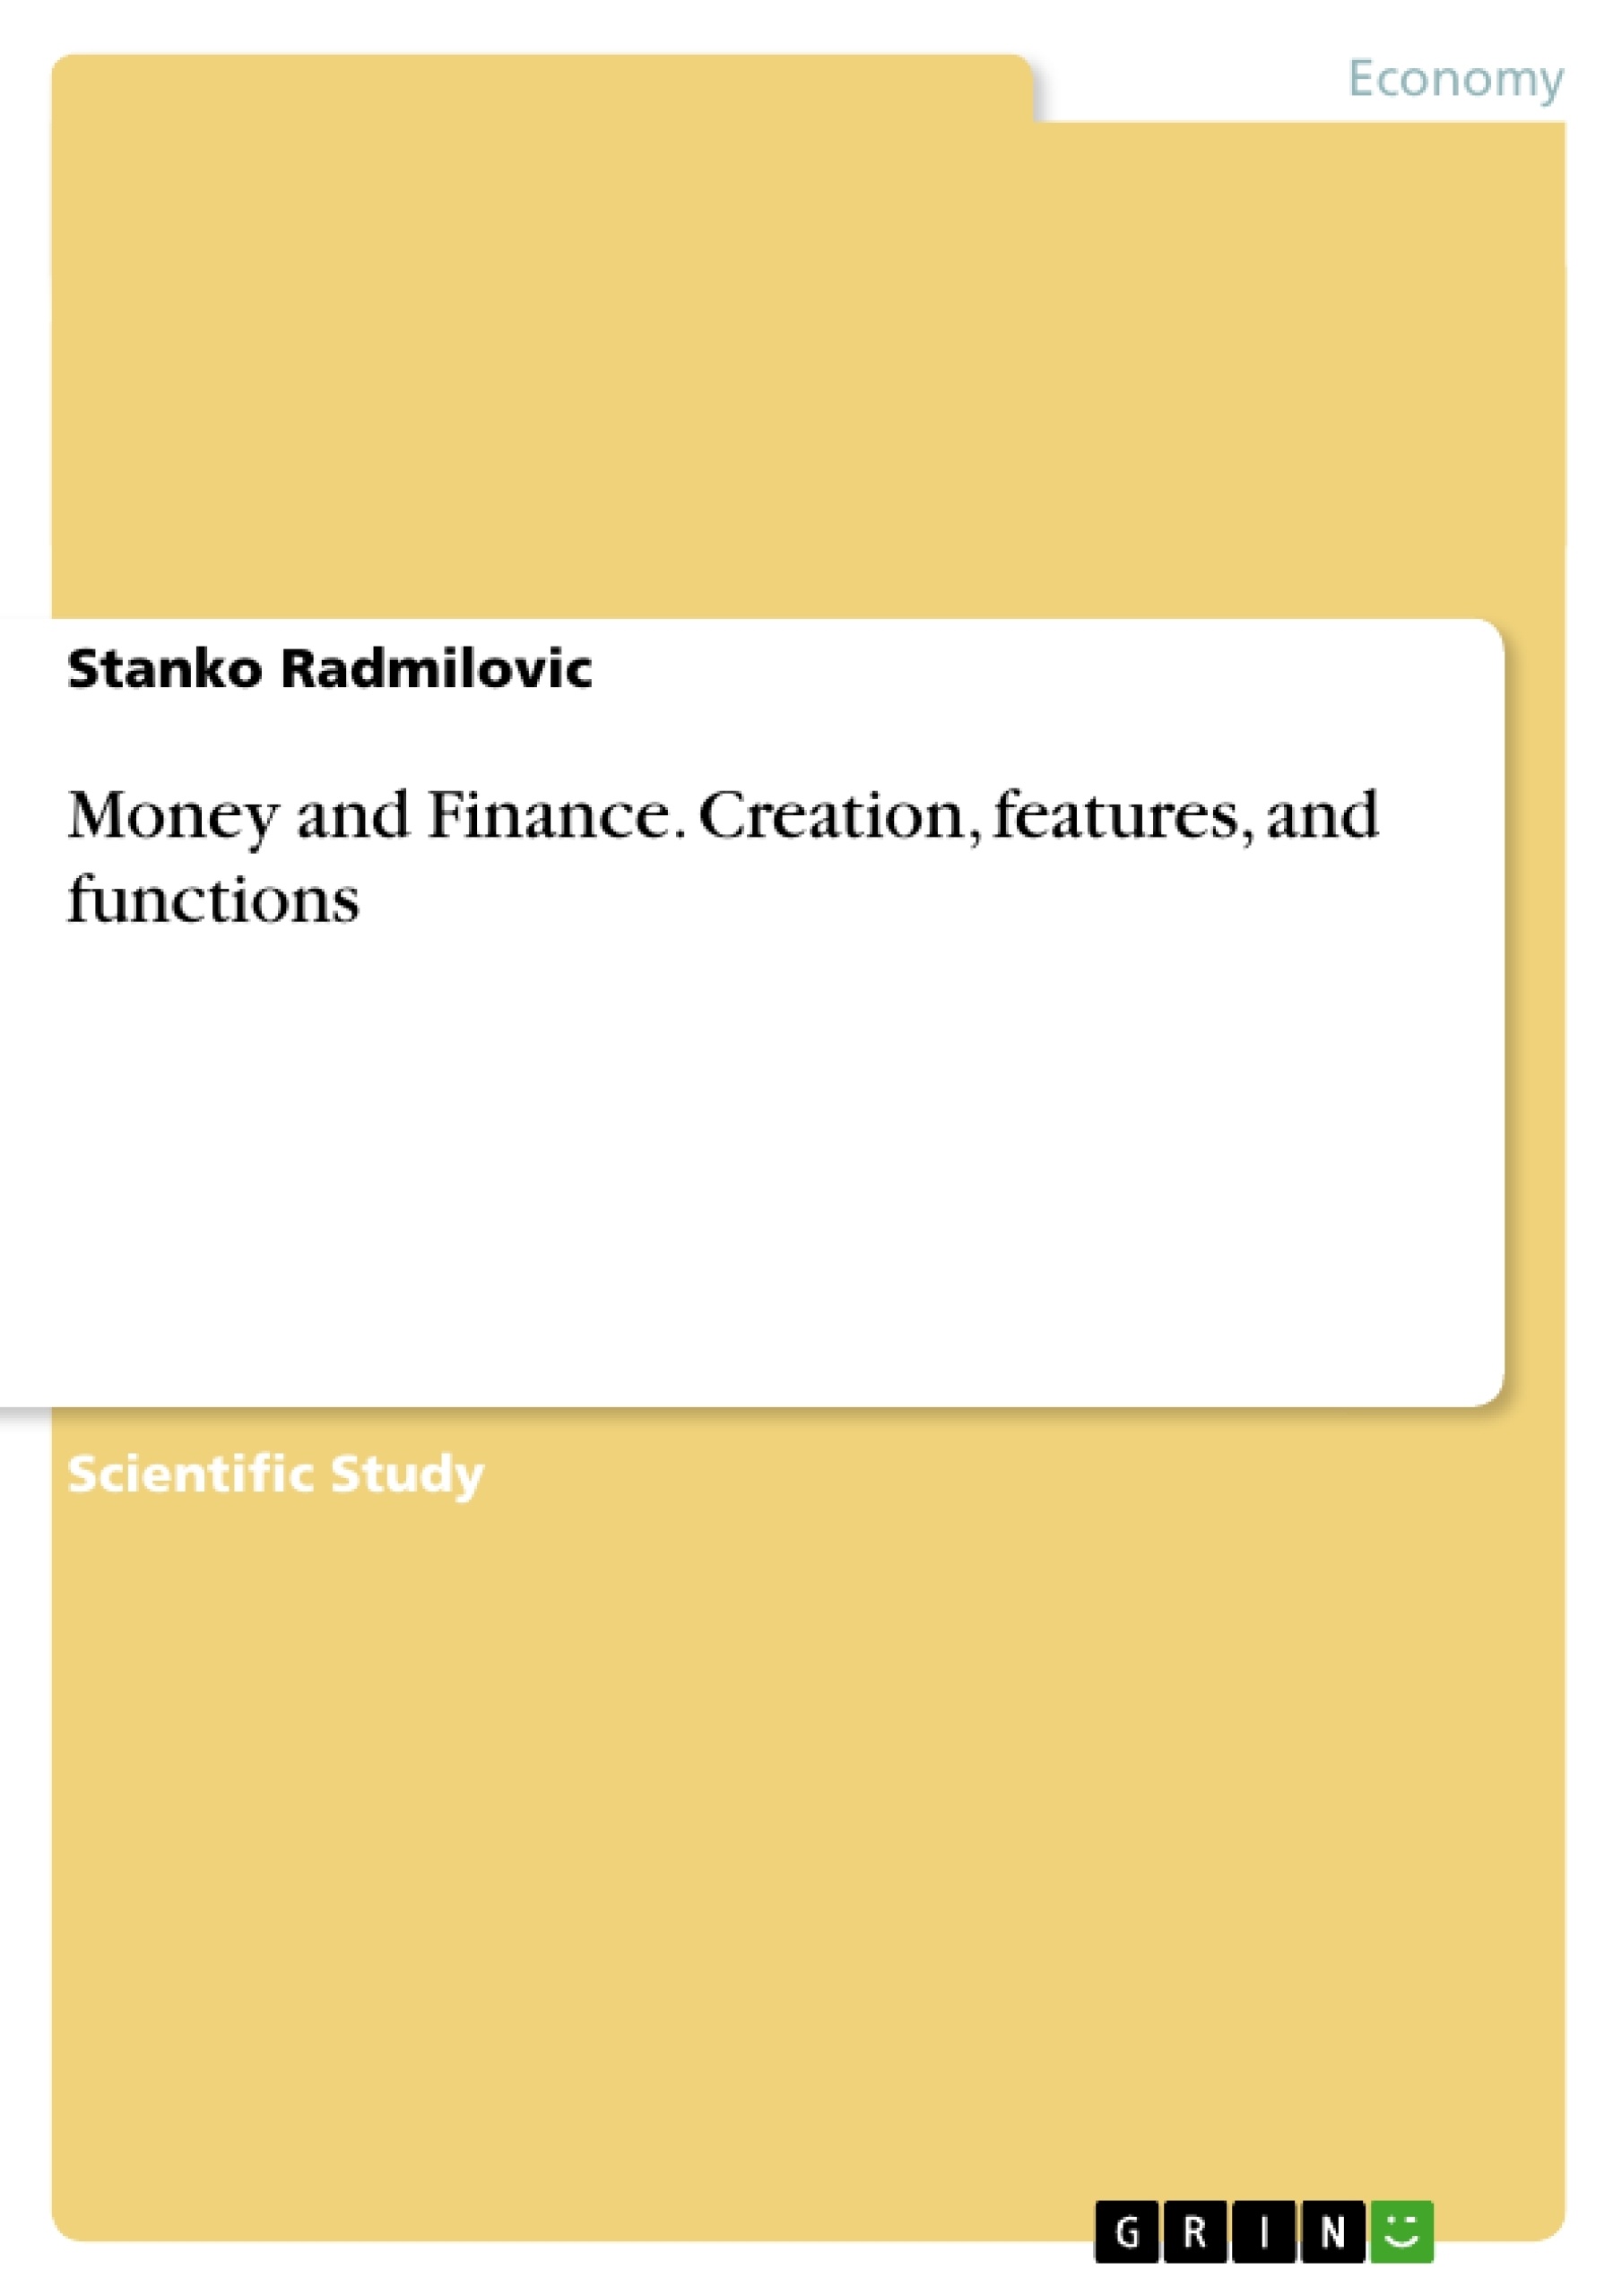 Title: Money and Finance. Creation, features, and functions